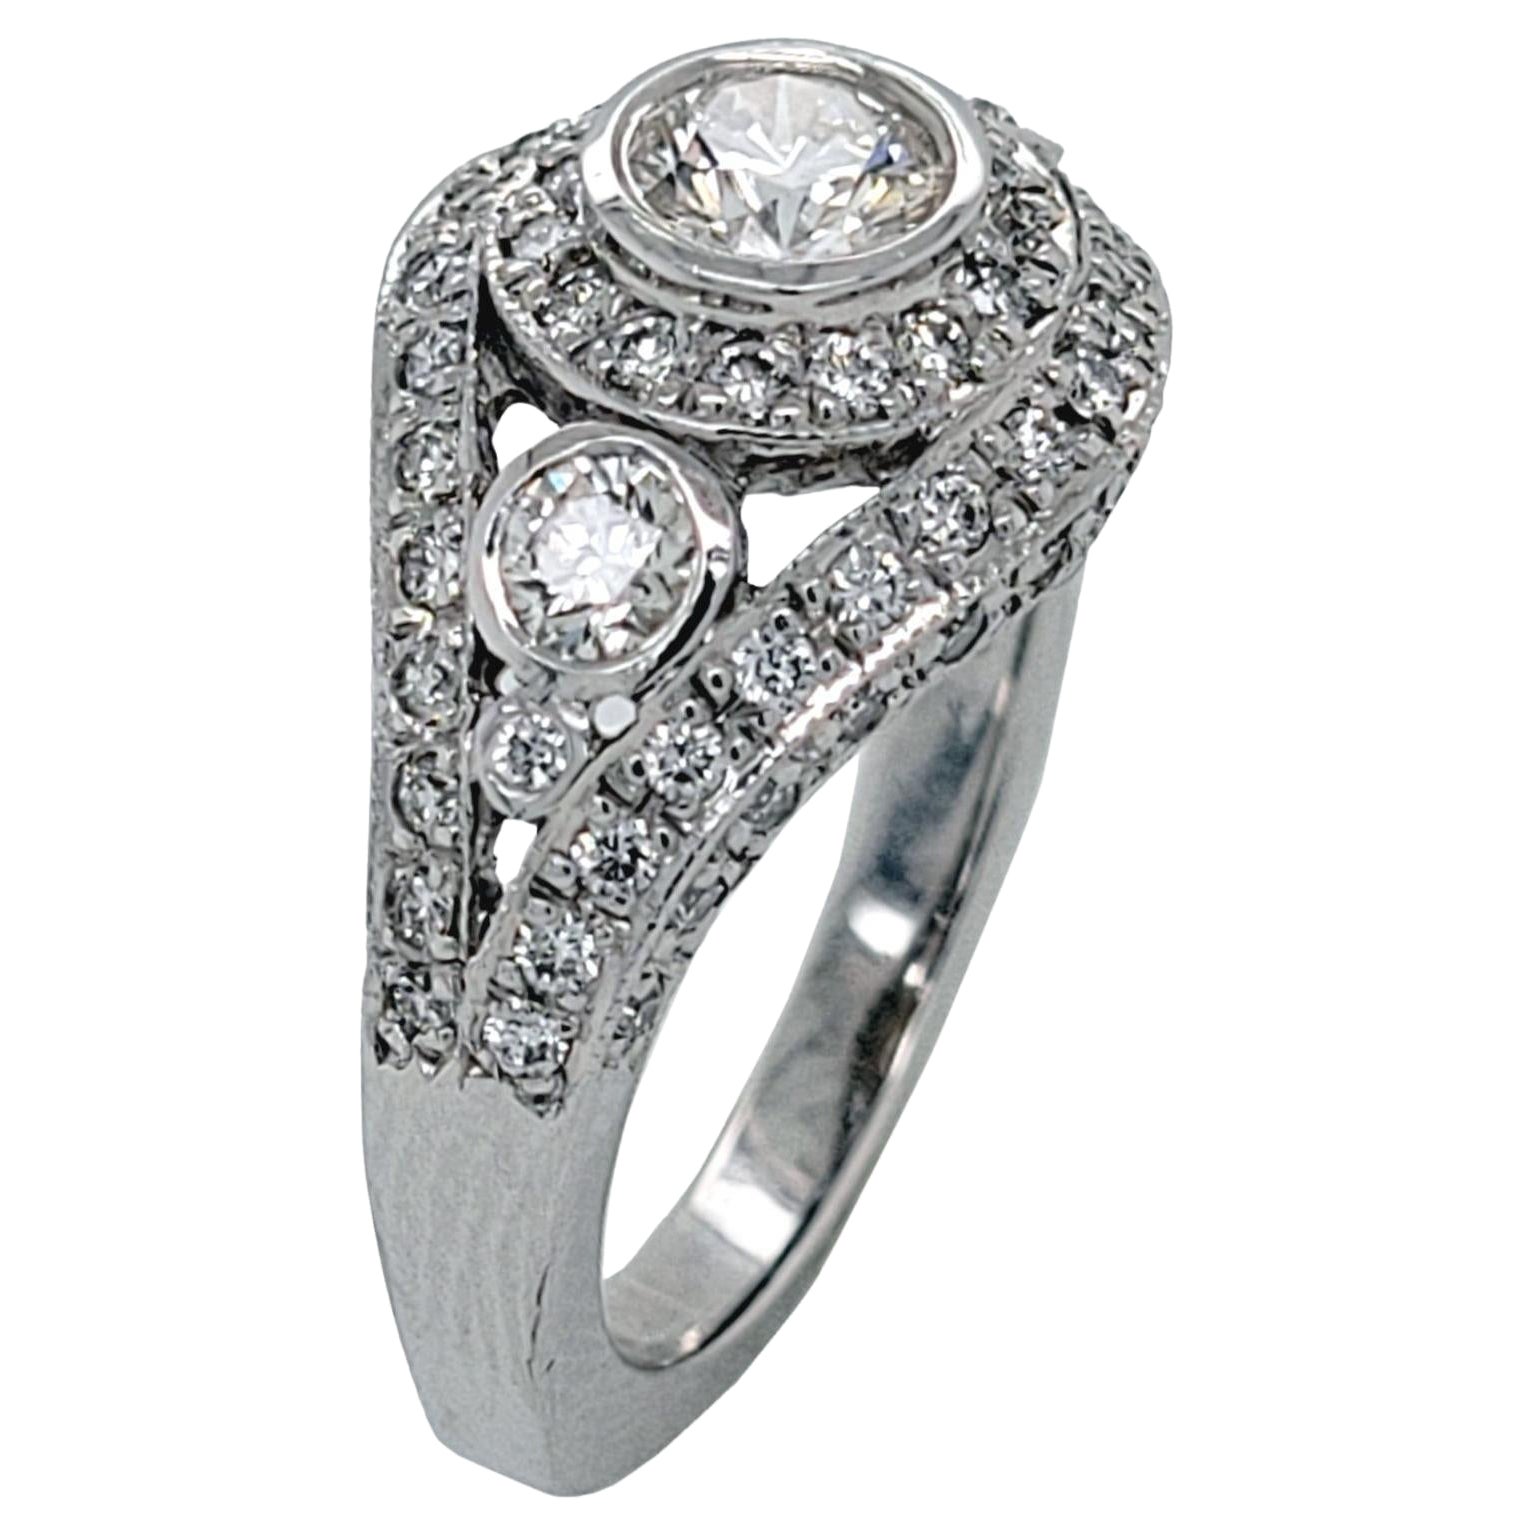 1.26 Ct, 18K Antique Style Diamond Engagement Ring For Sale